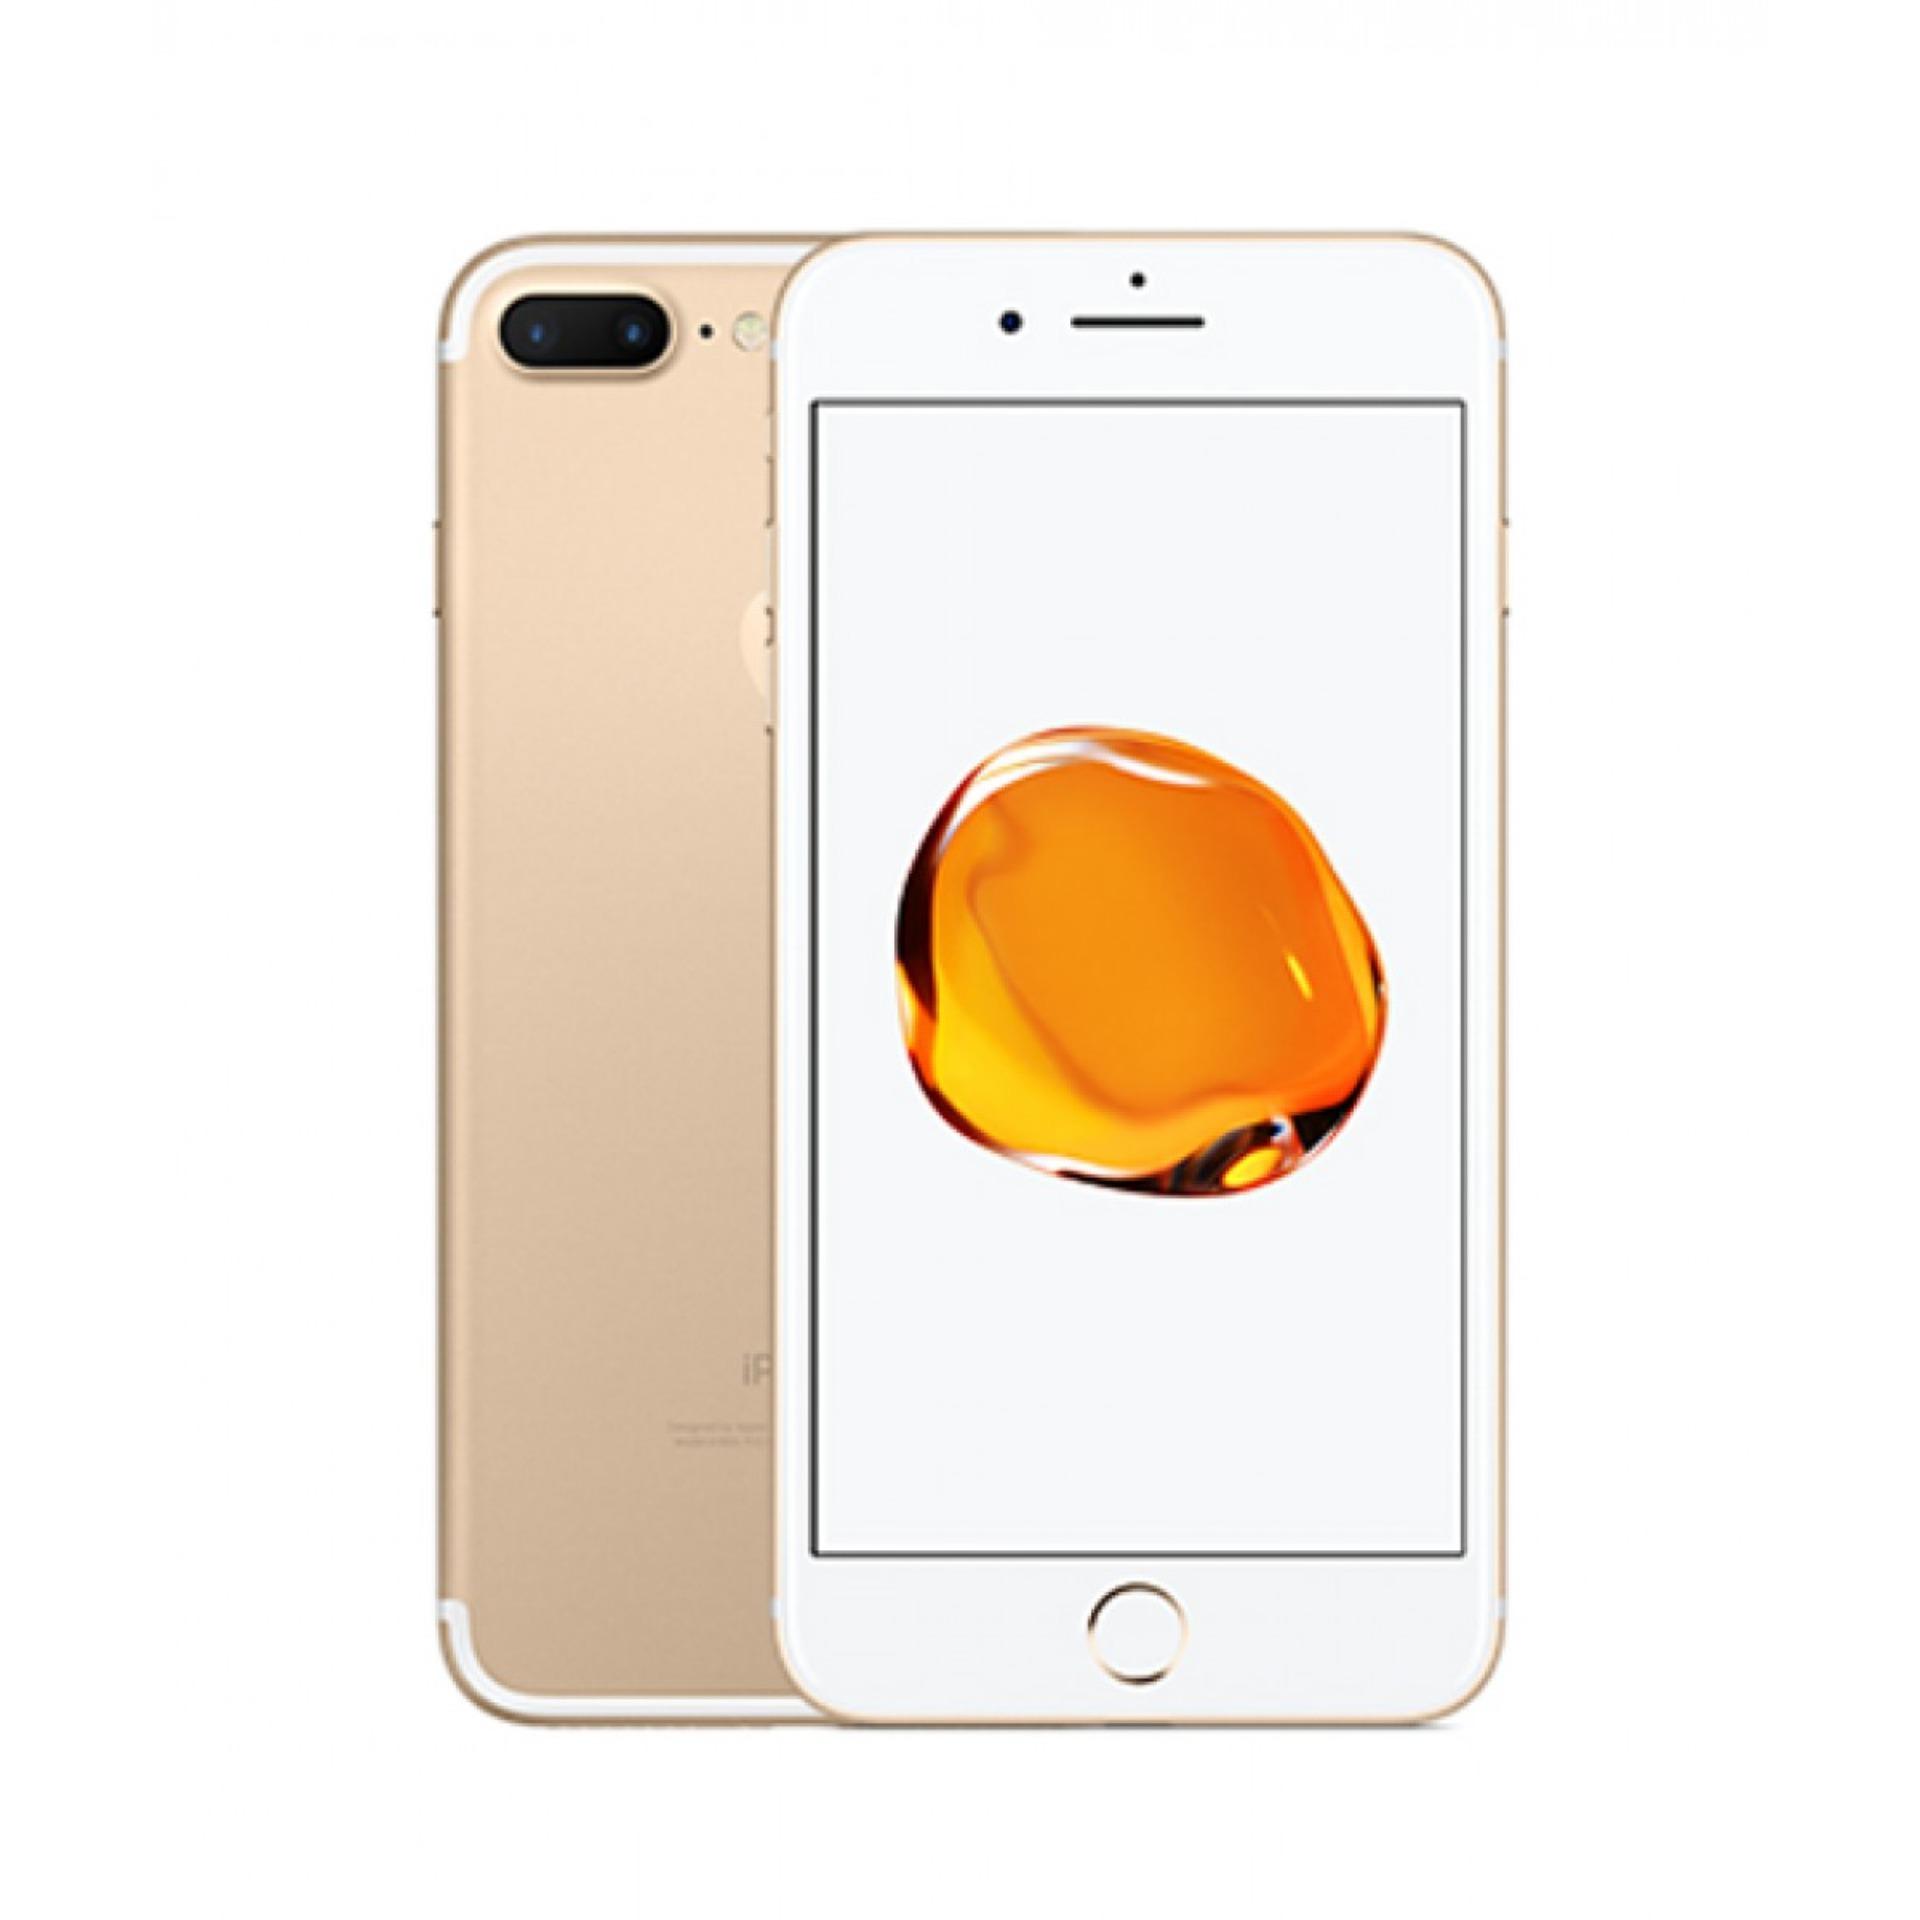 Apple iPhone 7 - 128GB - GOLD - Free Tempered Glass